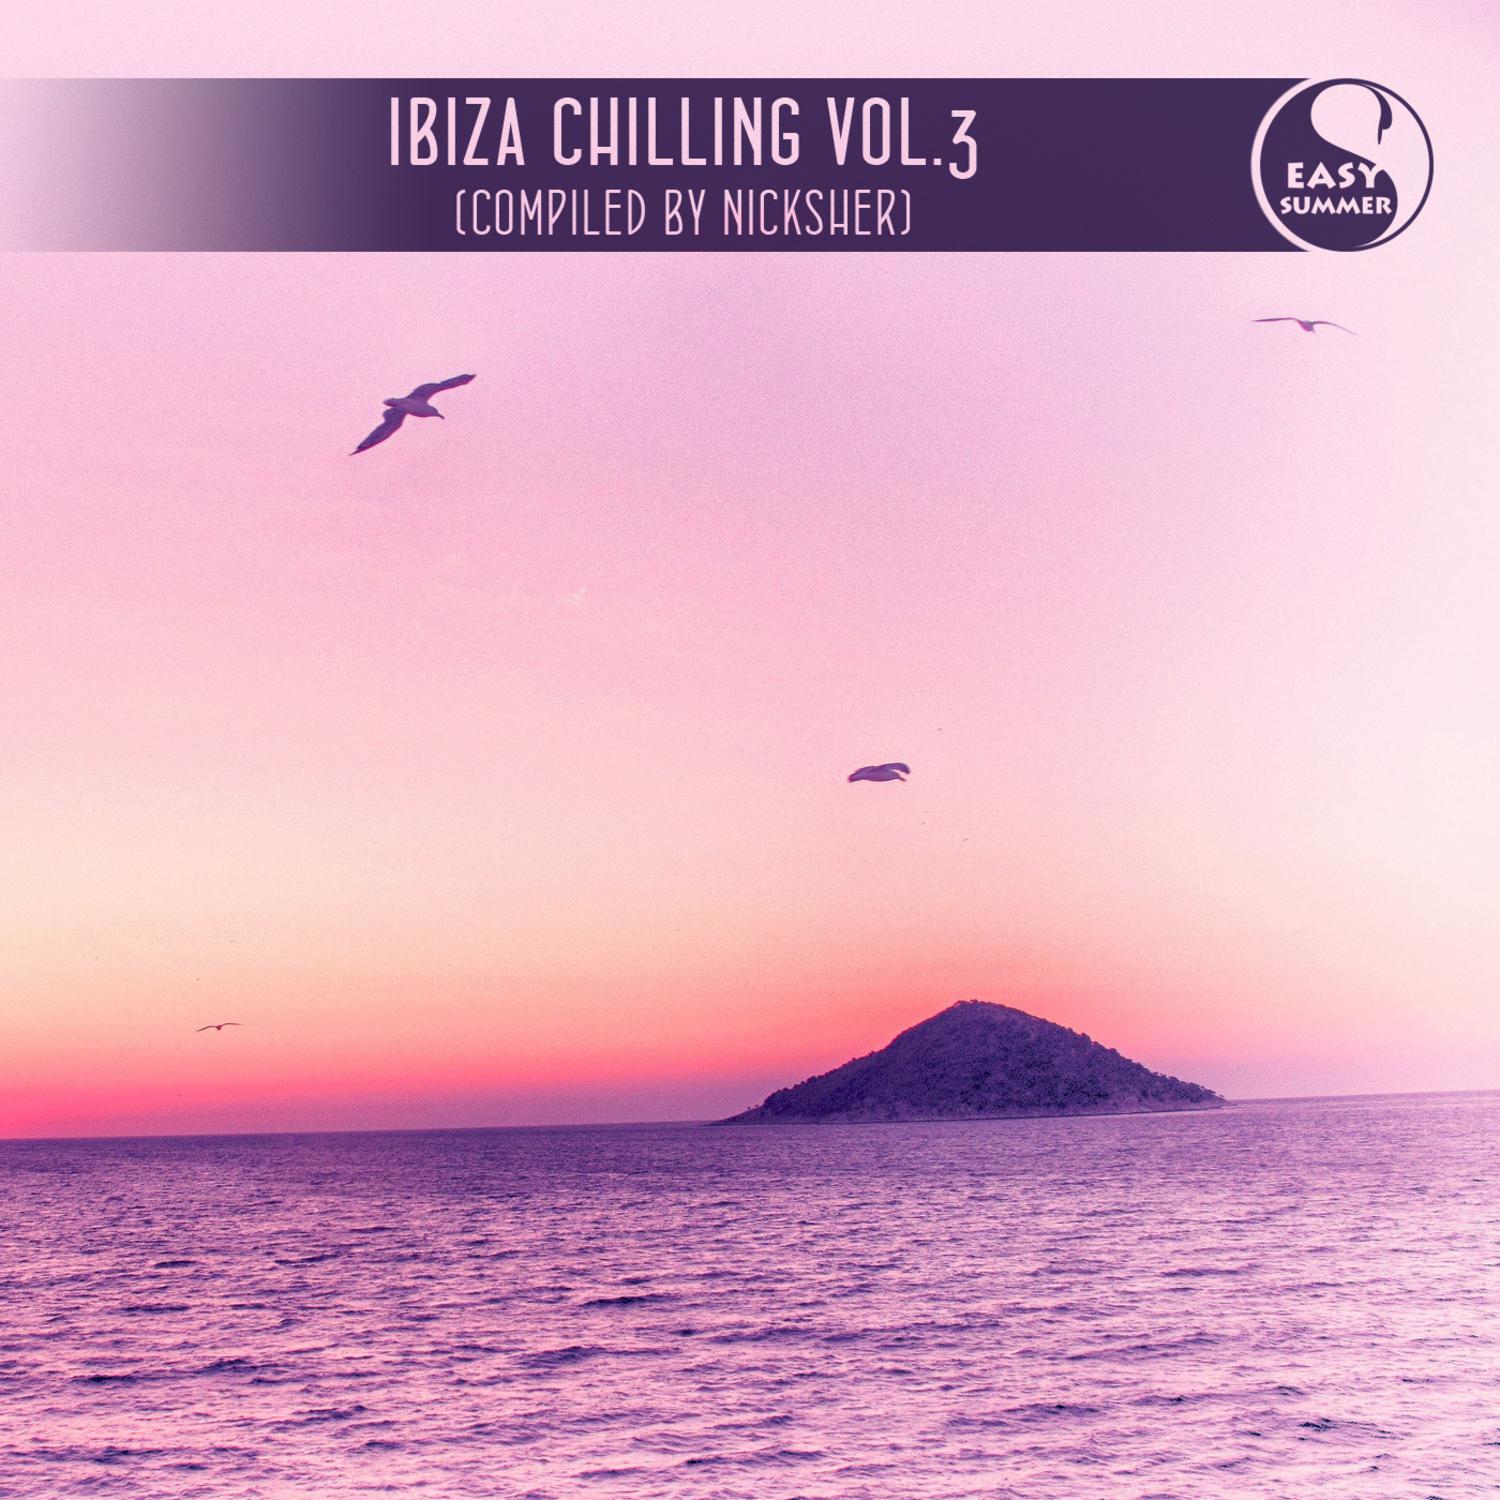 Ibiza Chilling, Vol. 3 (Compiled By Nicksher)